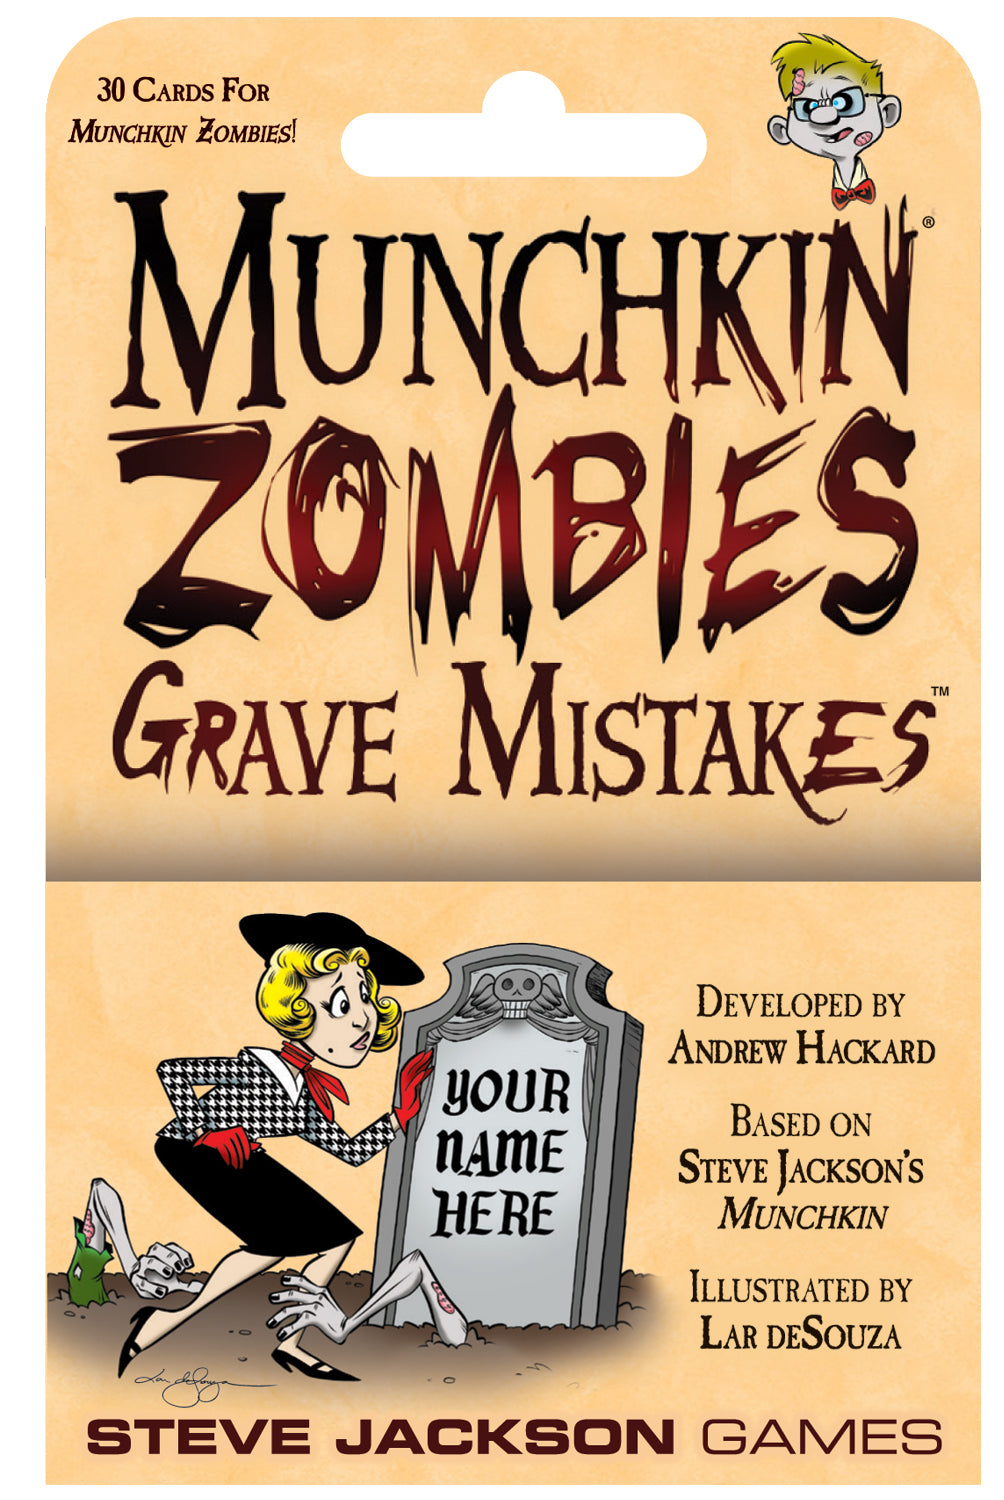 Munchkin Zombies: Grave Mistakes